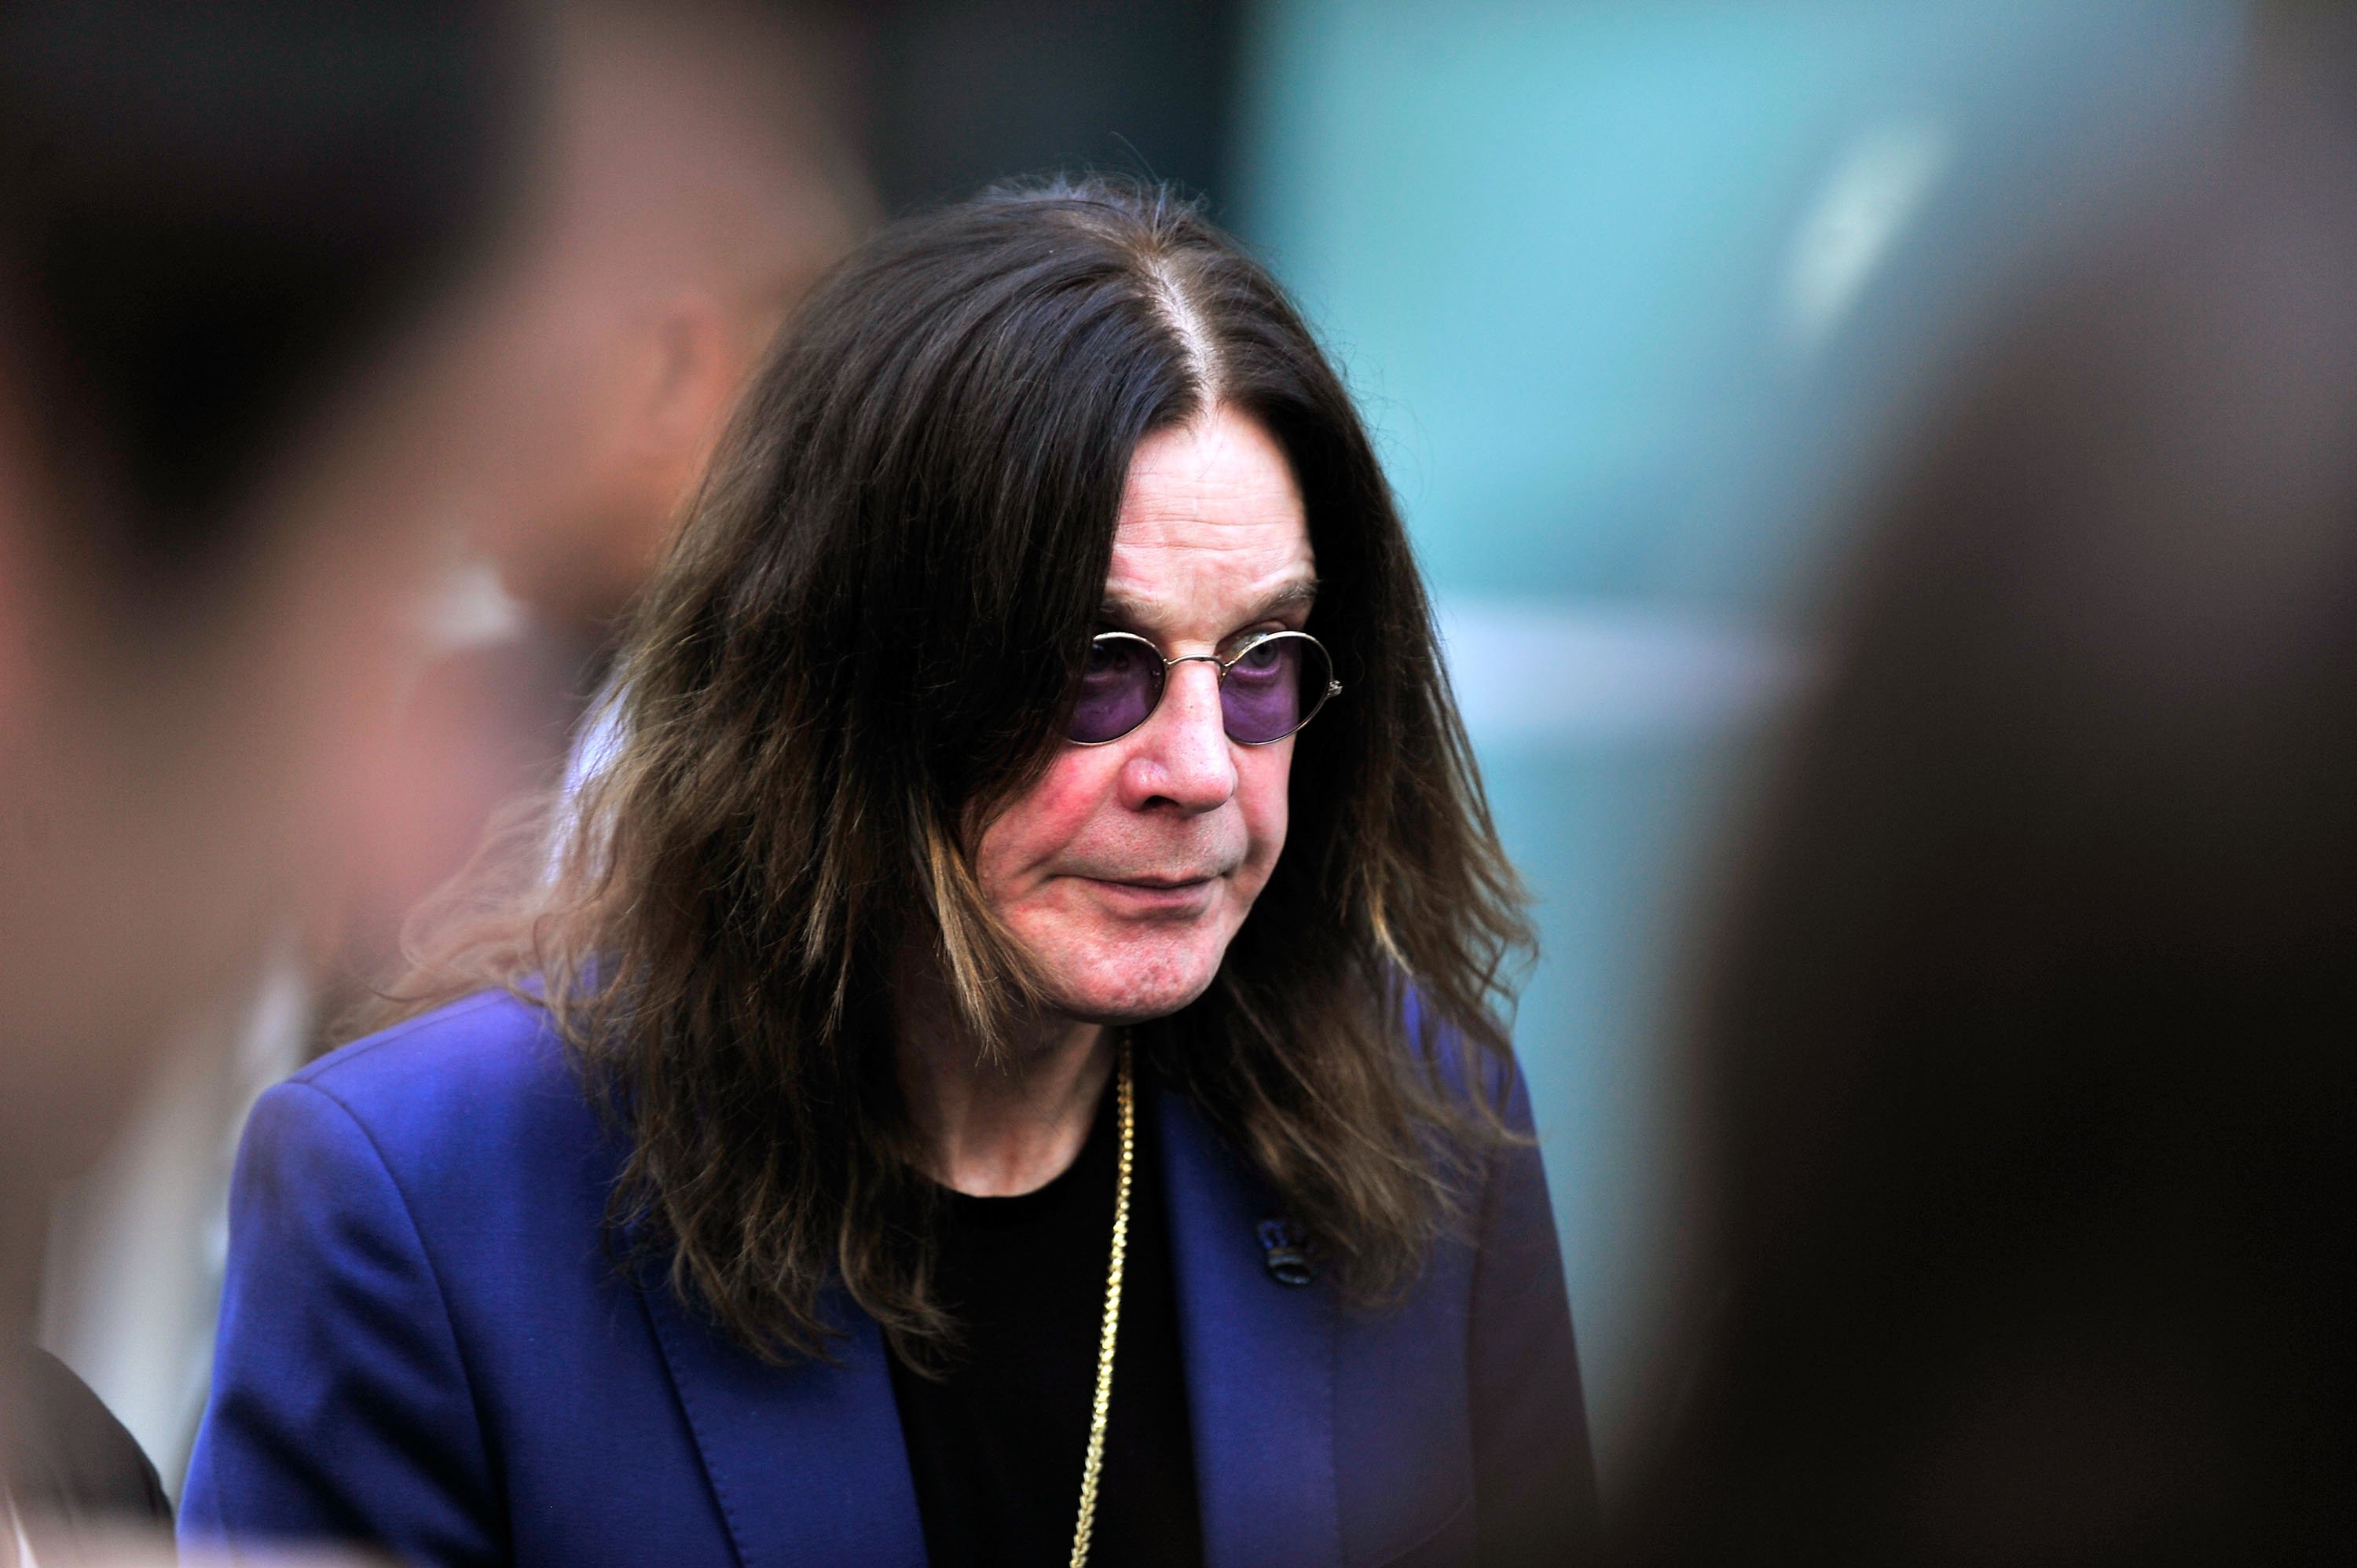 A closer look of Ozzy Osbourne, now 71. | Photo: Getty Images